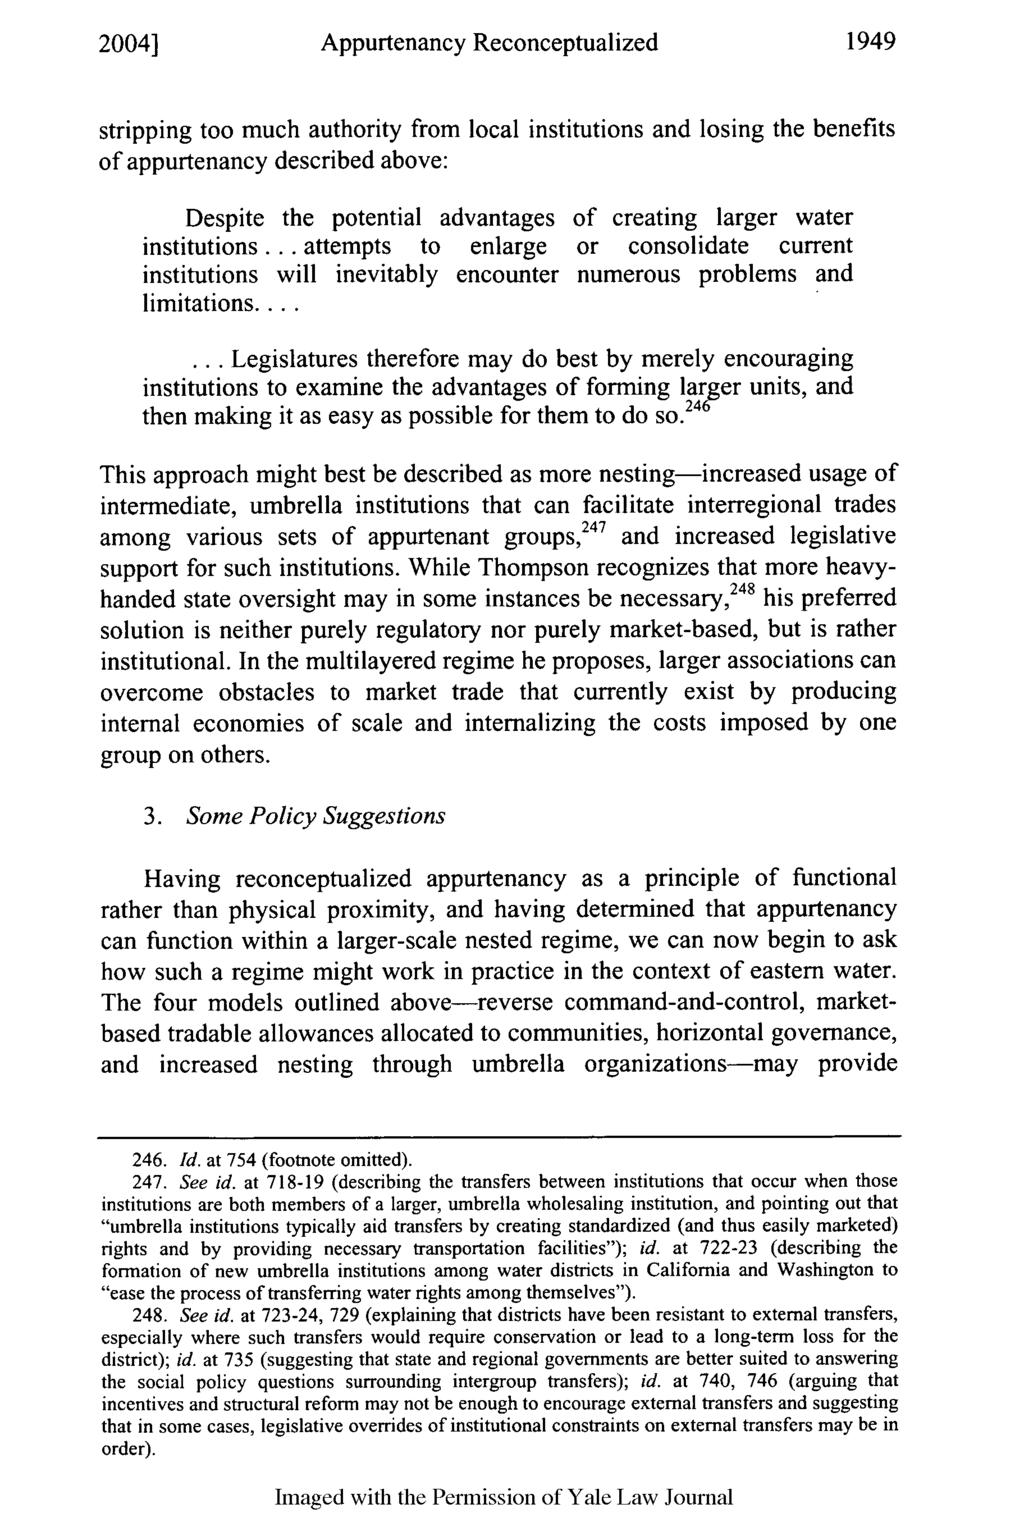 2004] Appurtenancy Reconceptualized 1949 stripping too much authority from local institutions and losing the benefits of appurtenancy described above: Despite the potential advantages of creating